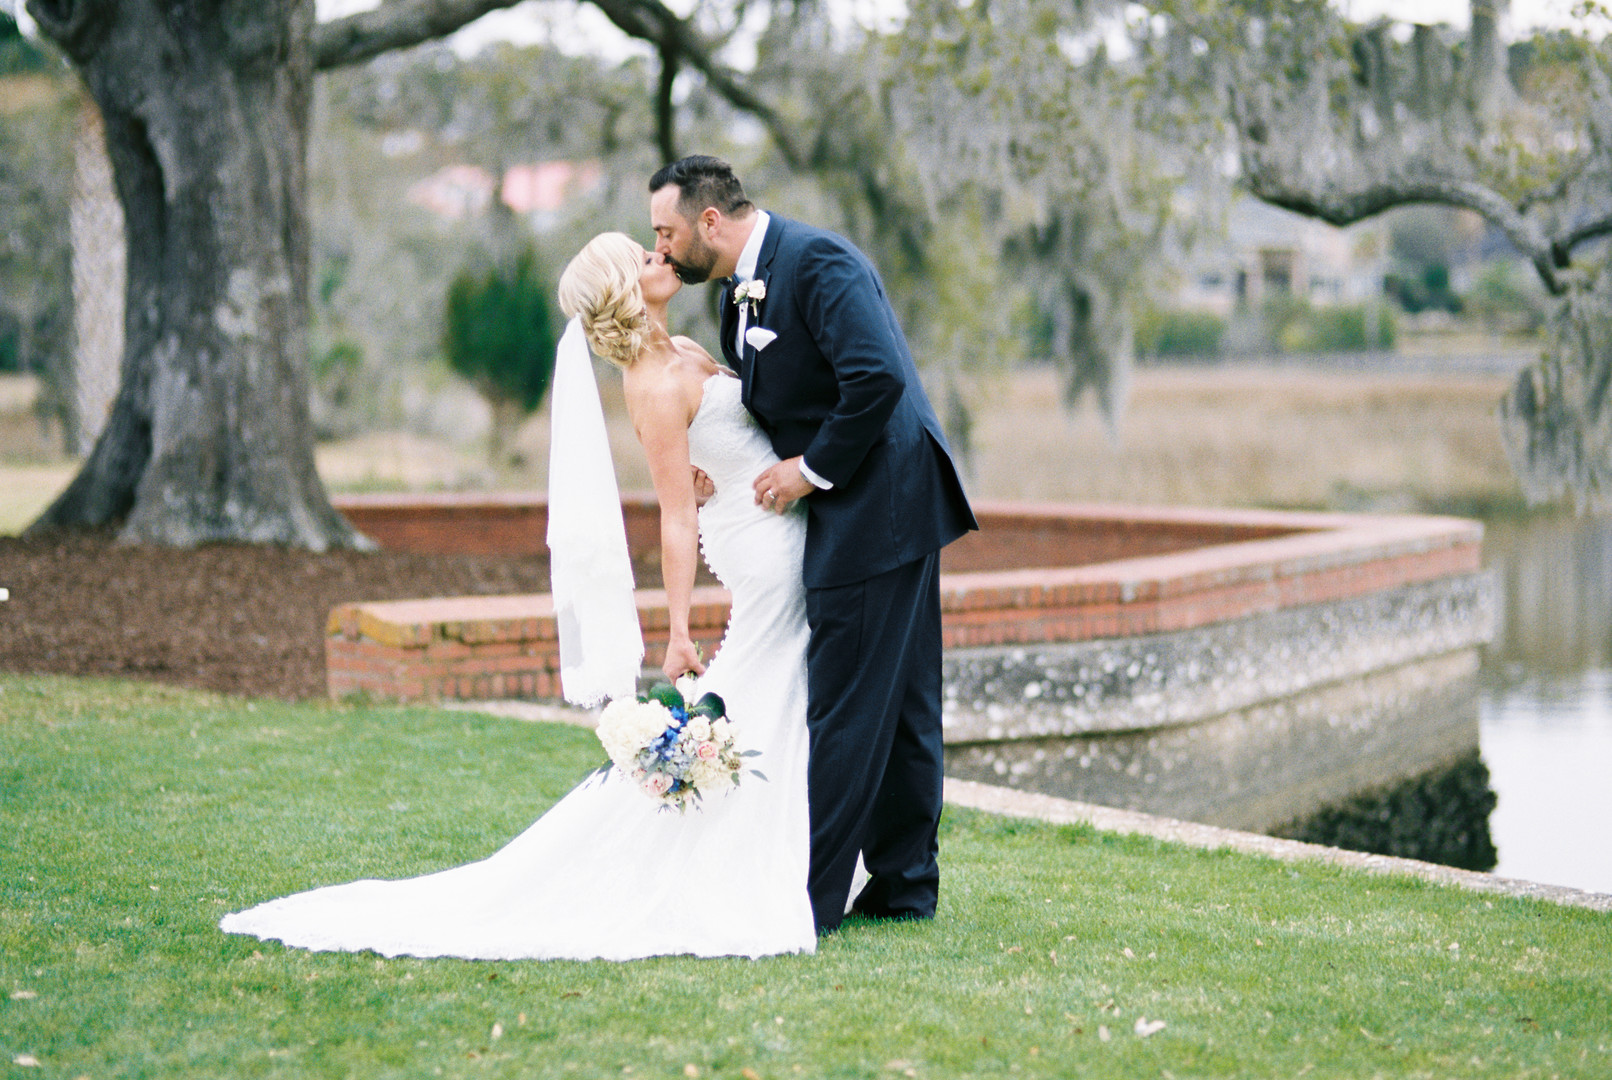 Sheorn_Snijders_CatherineAnnPhotography_catherineannphotographywedding31018carolineericfilm0105_big.jpg